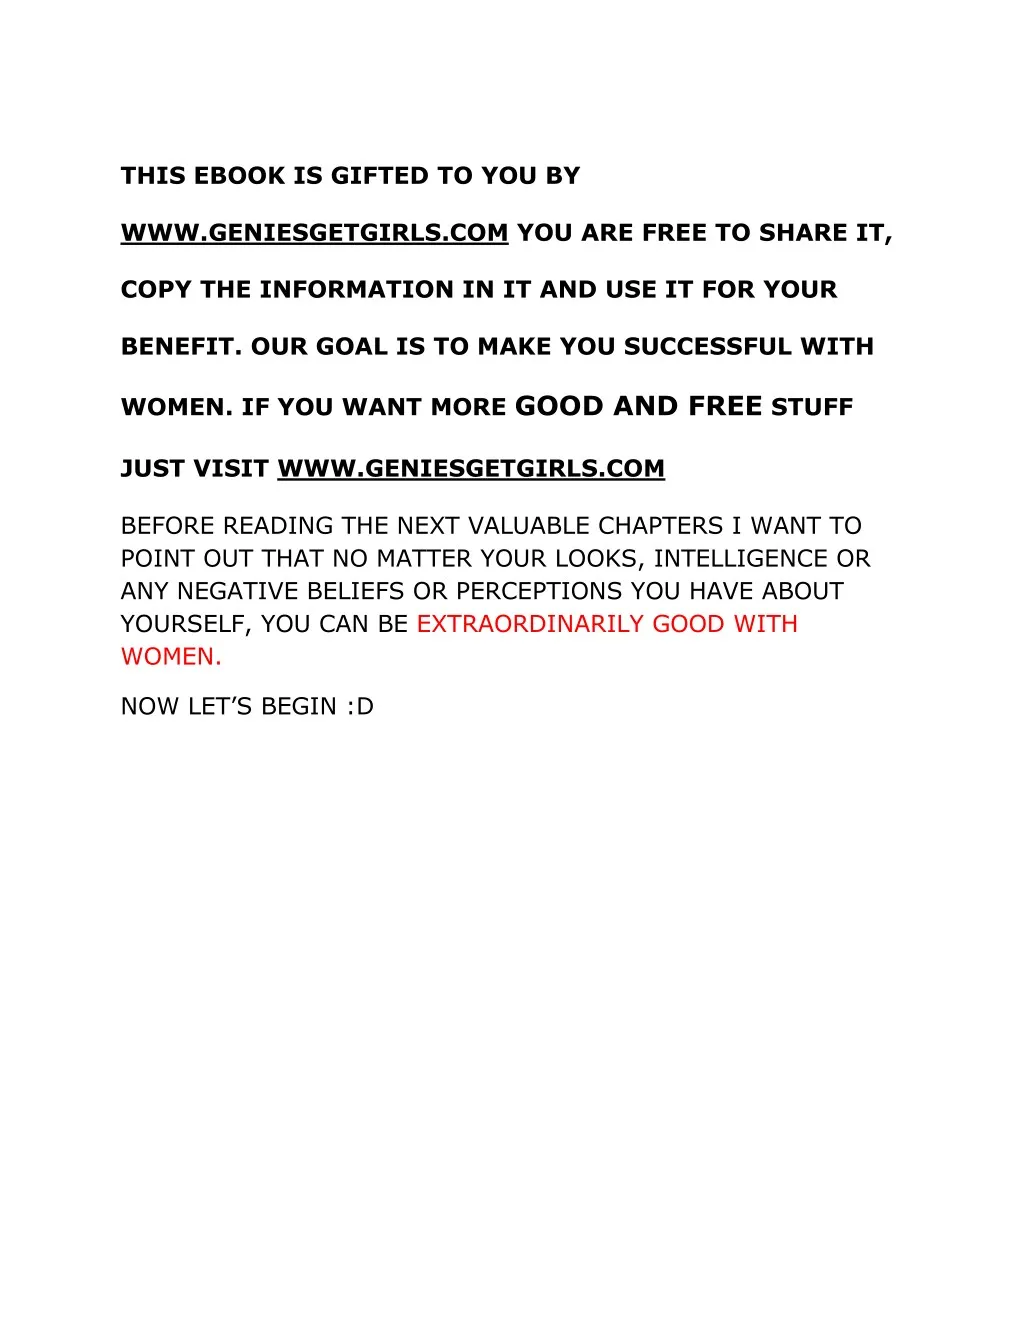 this ebook is gifted to you by